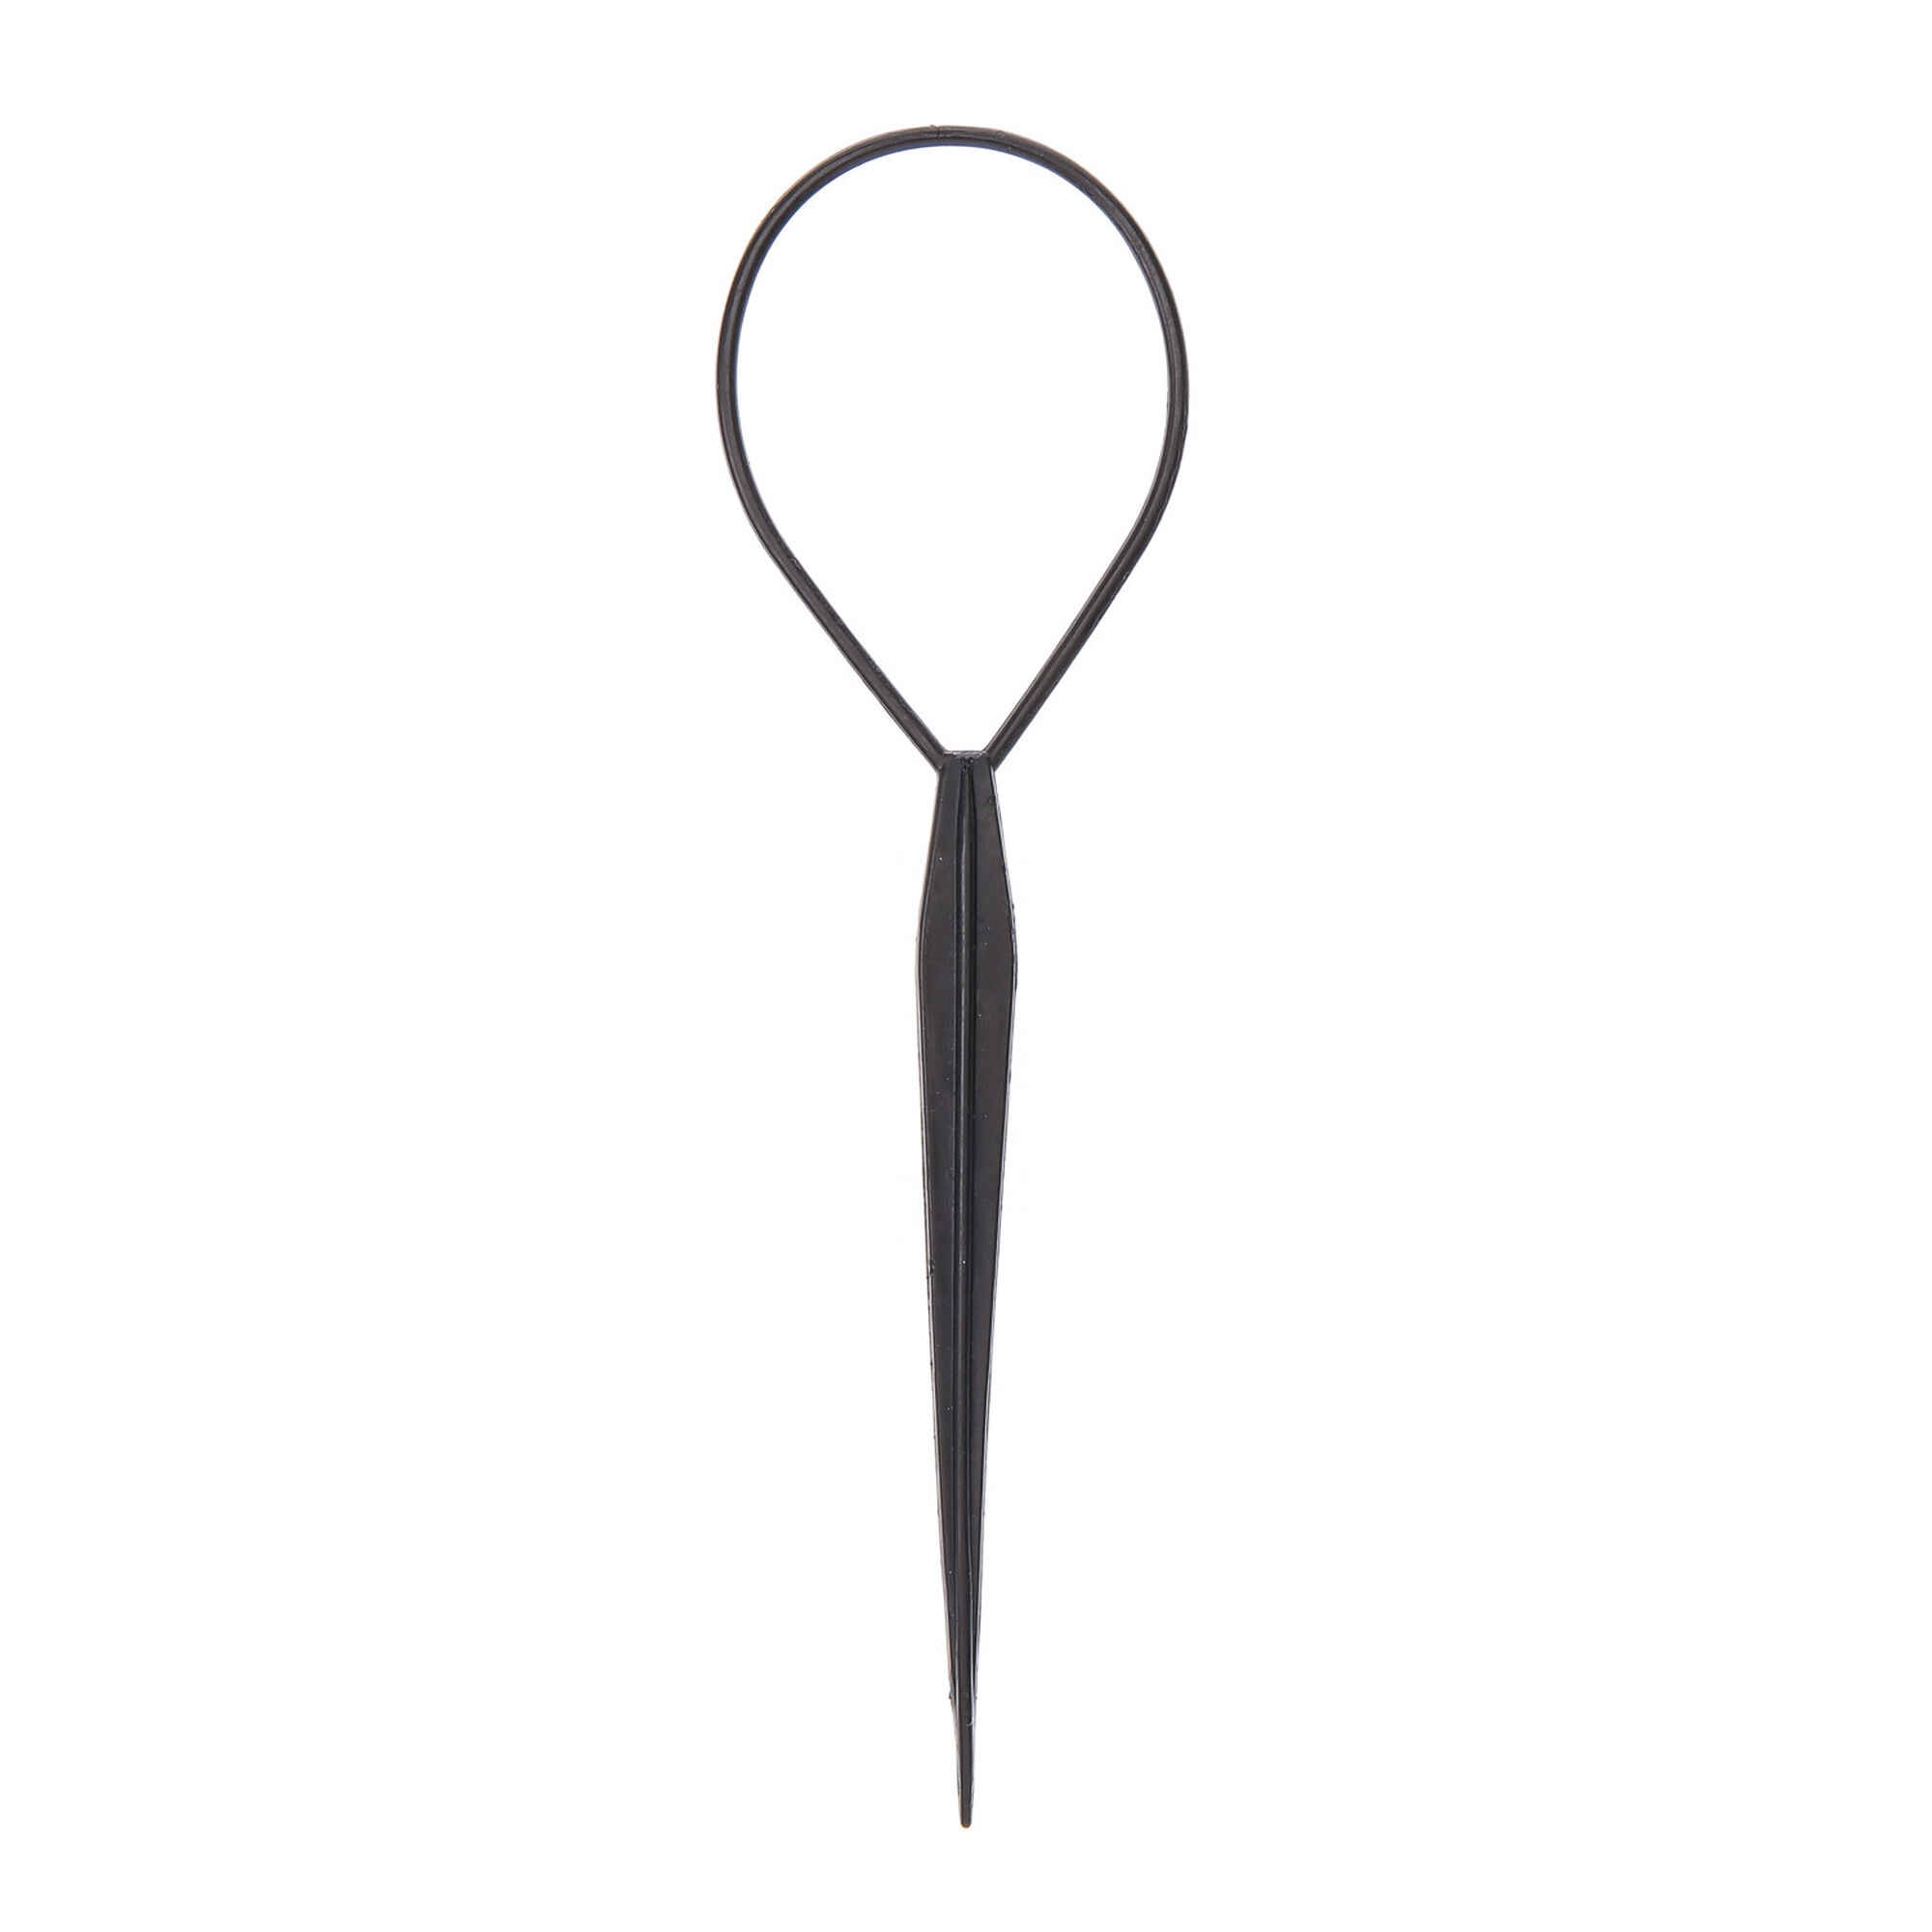 View Claires Hair Style Tool Black information